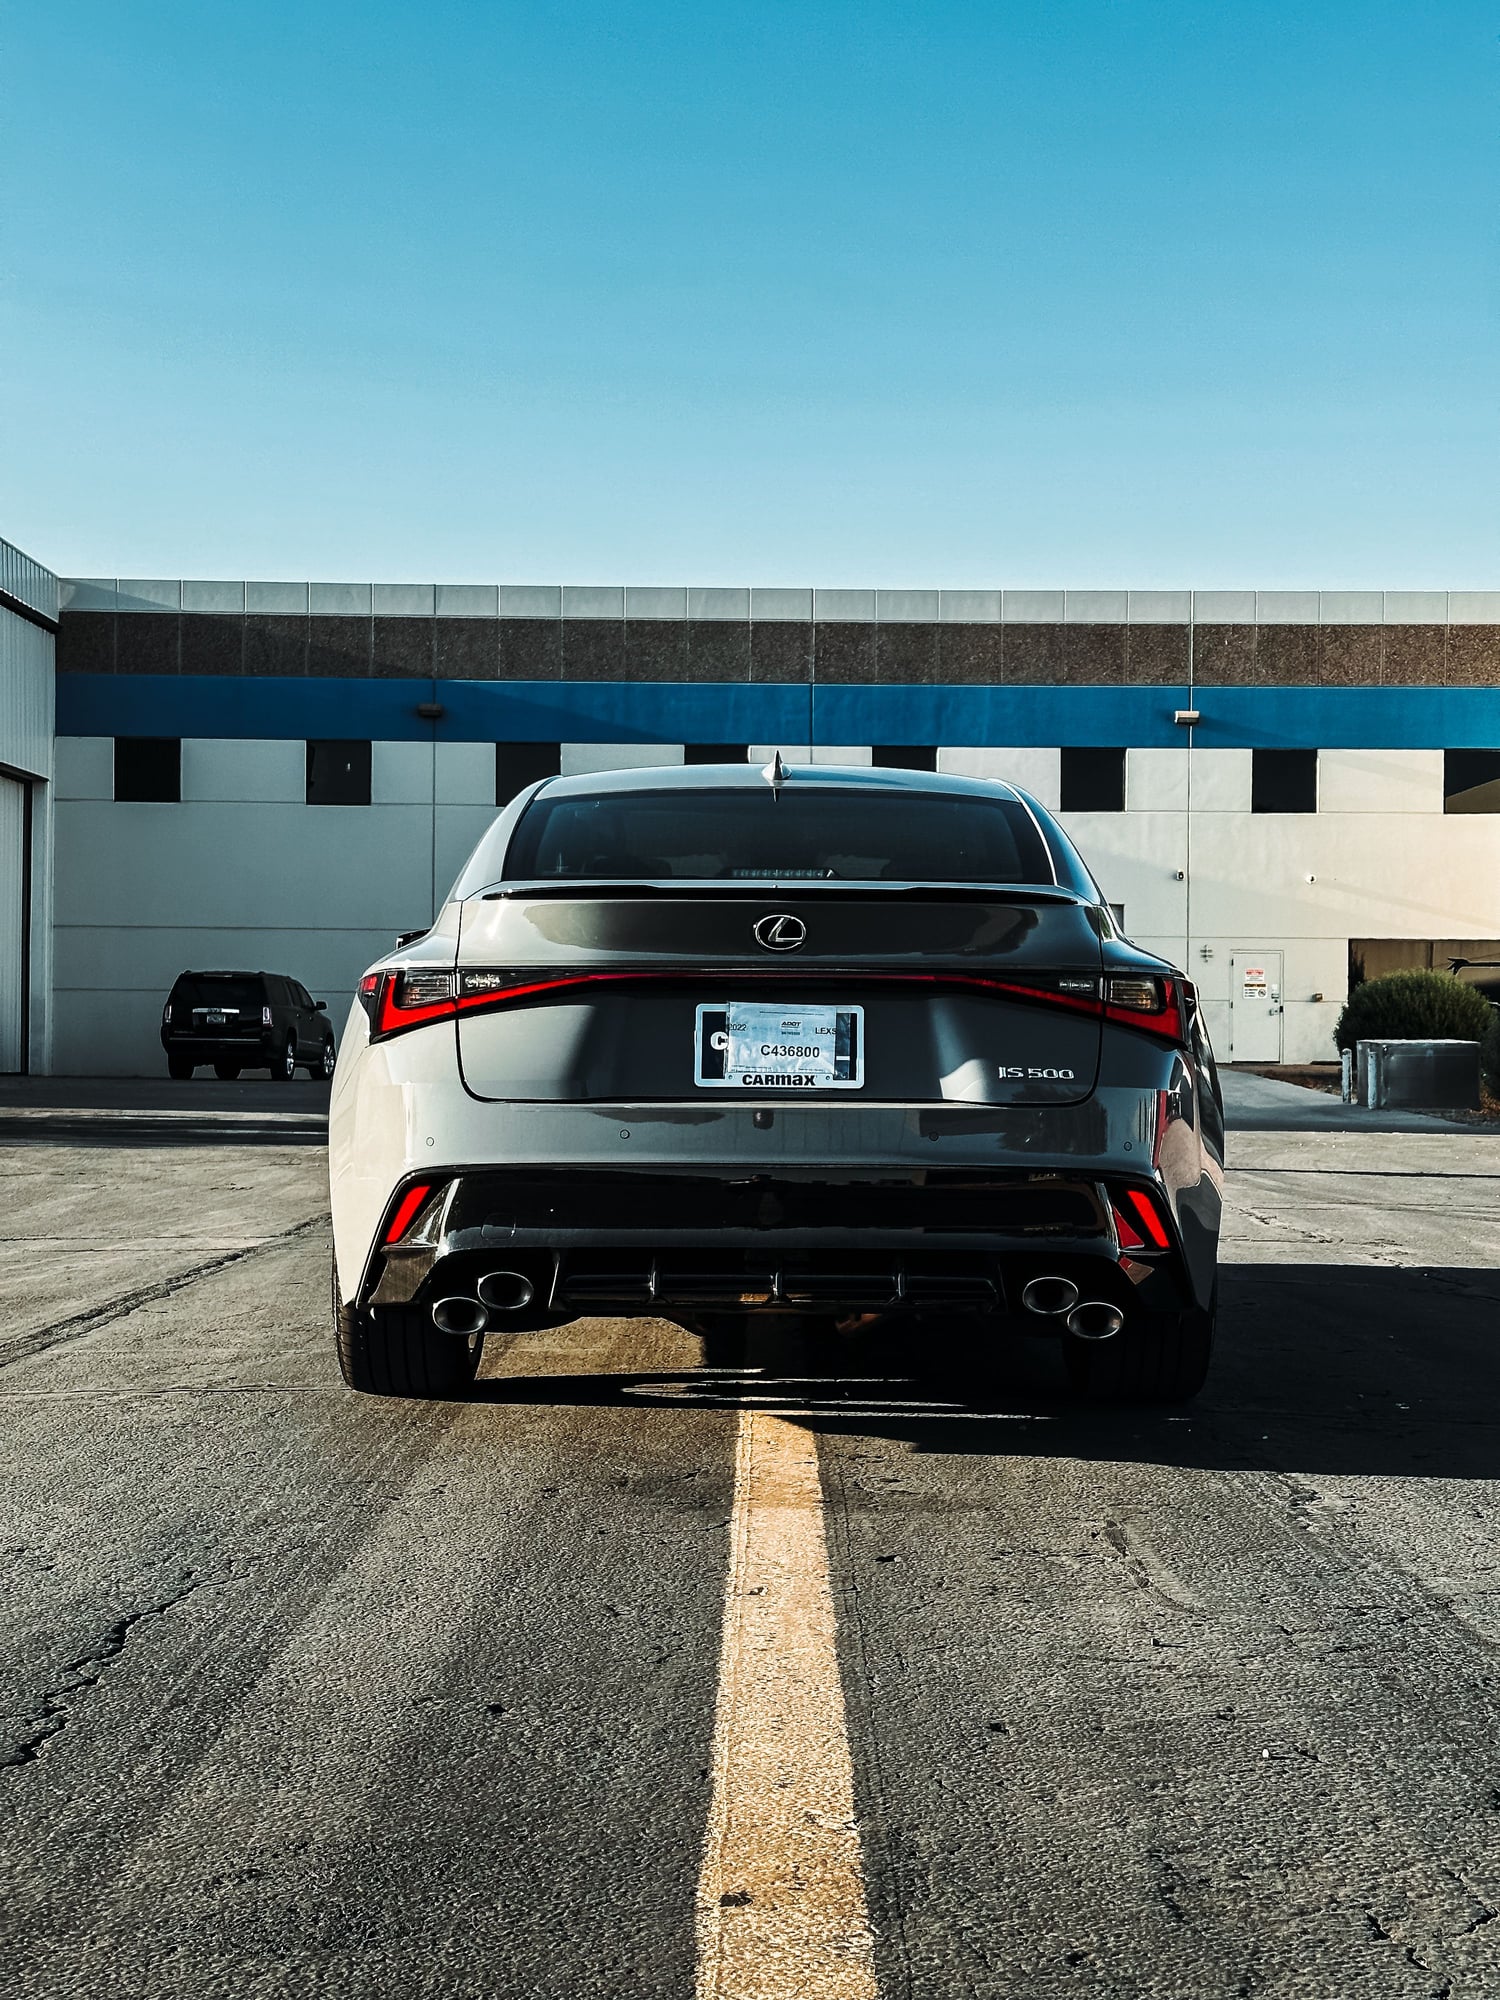 Lexus IS 500 at Fashion Island  Sometimes the best way to stand out is to  fly under the radar. Come see the #LexusIS 500 Launch Edition in its  exclusive Incognito grey